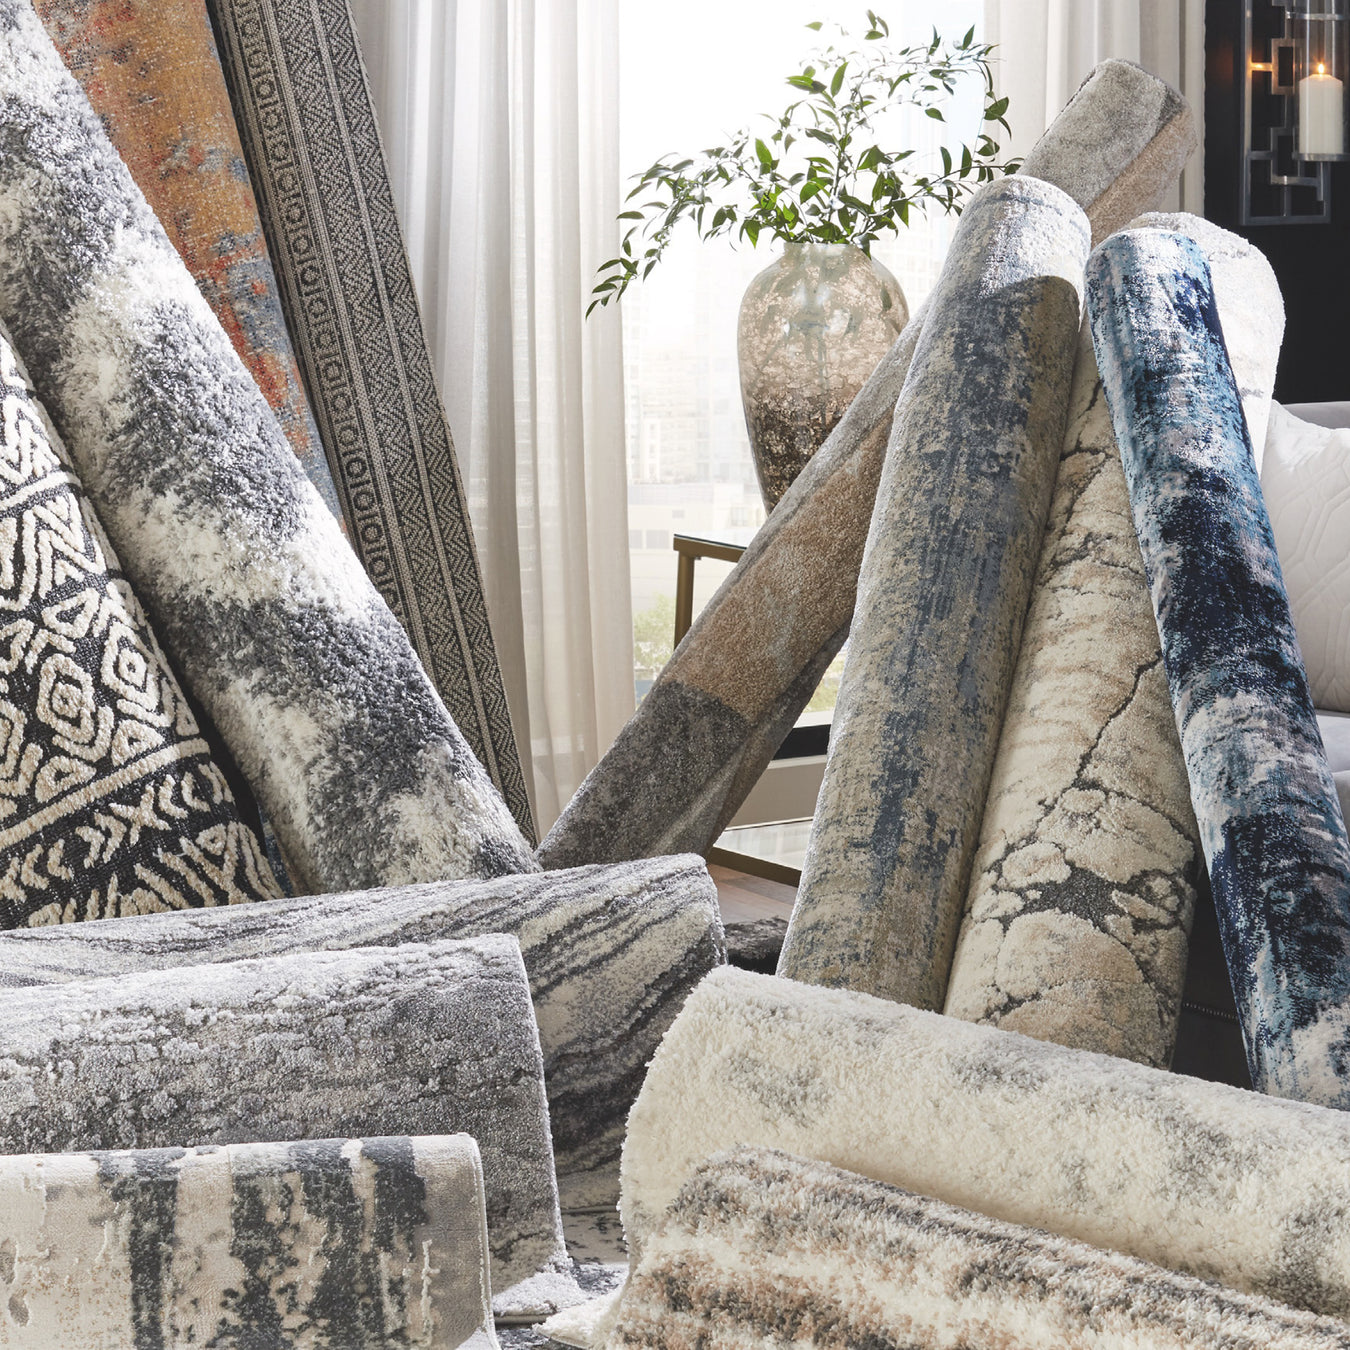 Shop Indoor and Outdoor Rugs at JR Furniture Store in Fayetteville, NC 28311